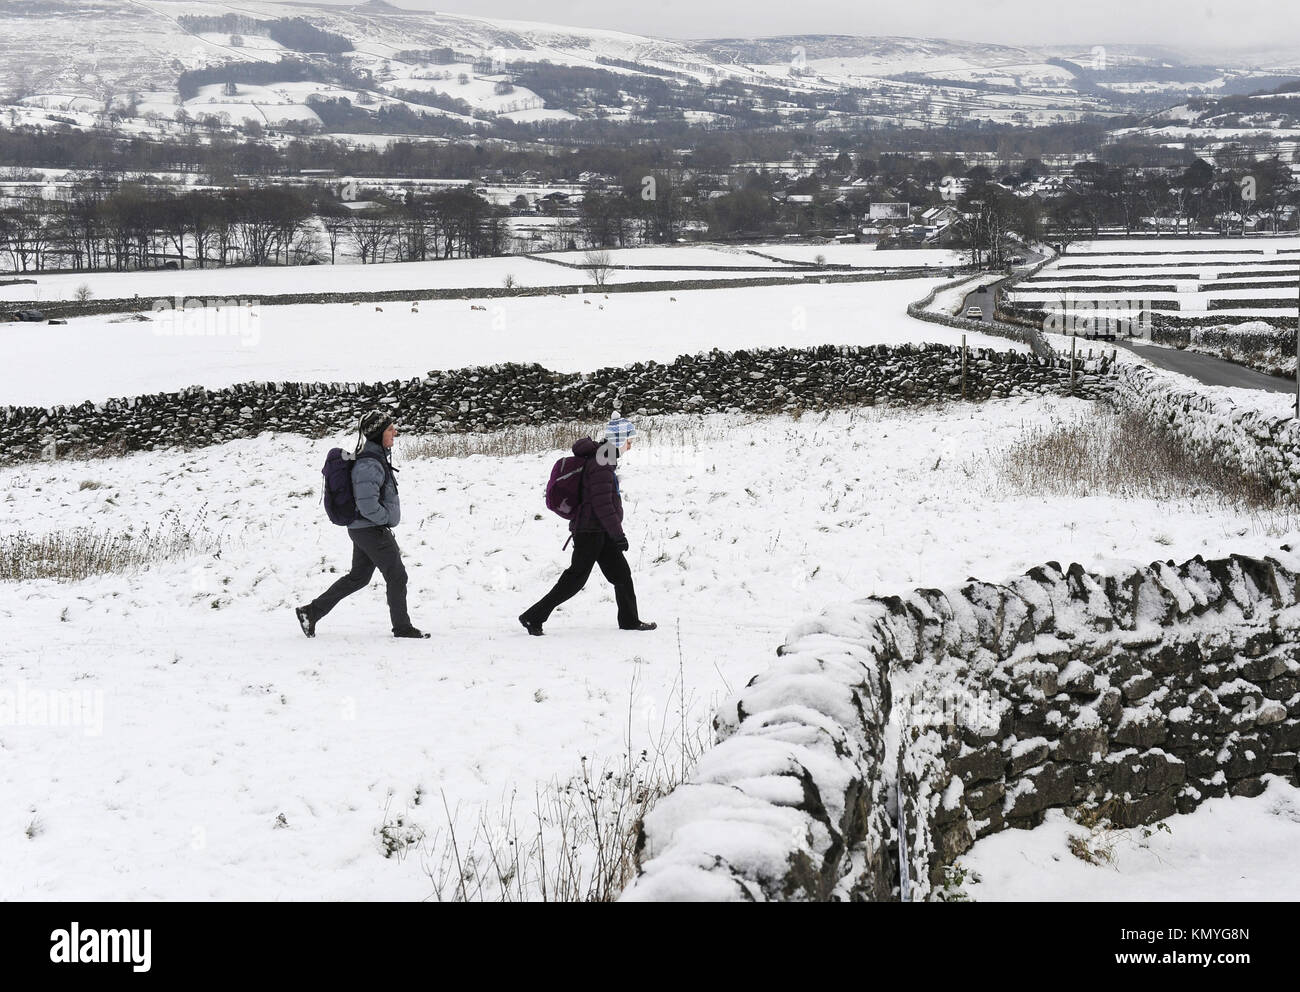 Walkers in the Peak District, as widespread disruption is expected as snow continues to fall across large parts of the UK, with forecasters warning some communities could be cut off as temperatures plummet. Stock Photo